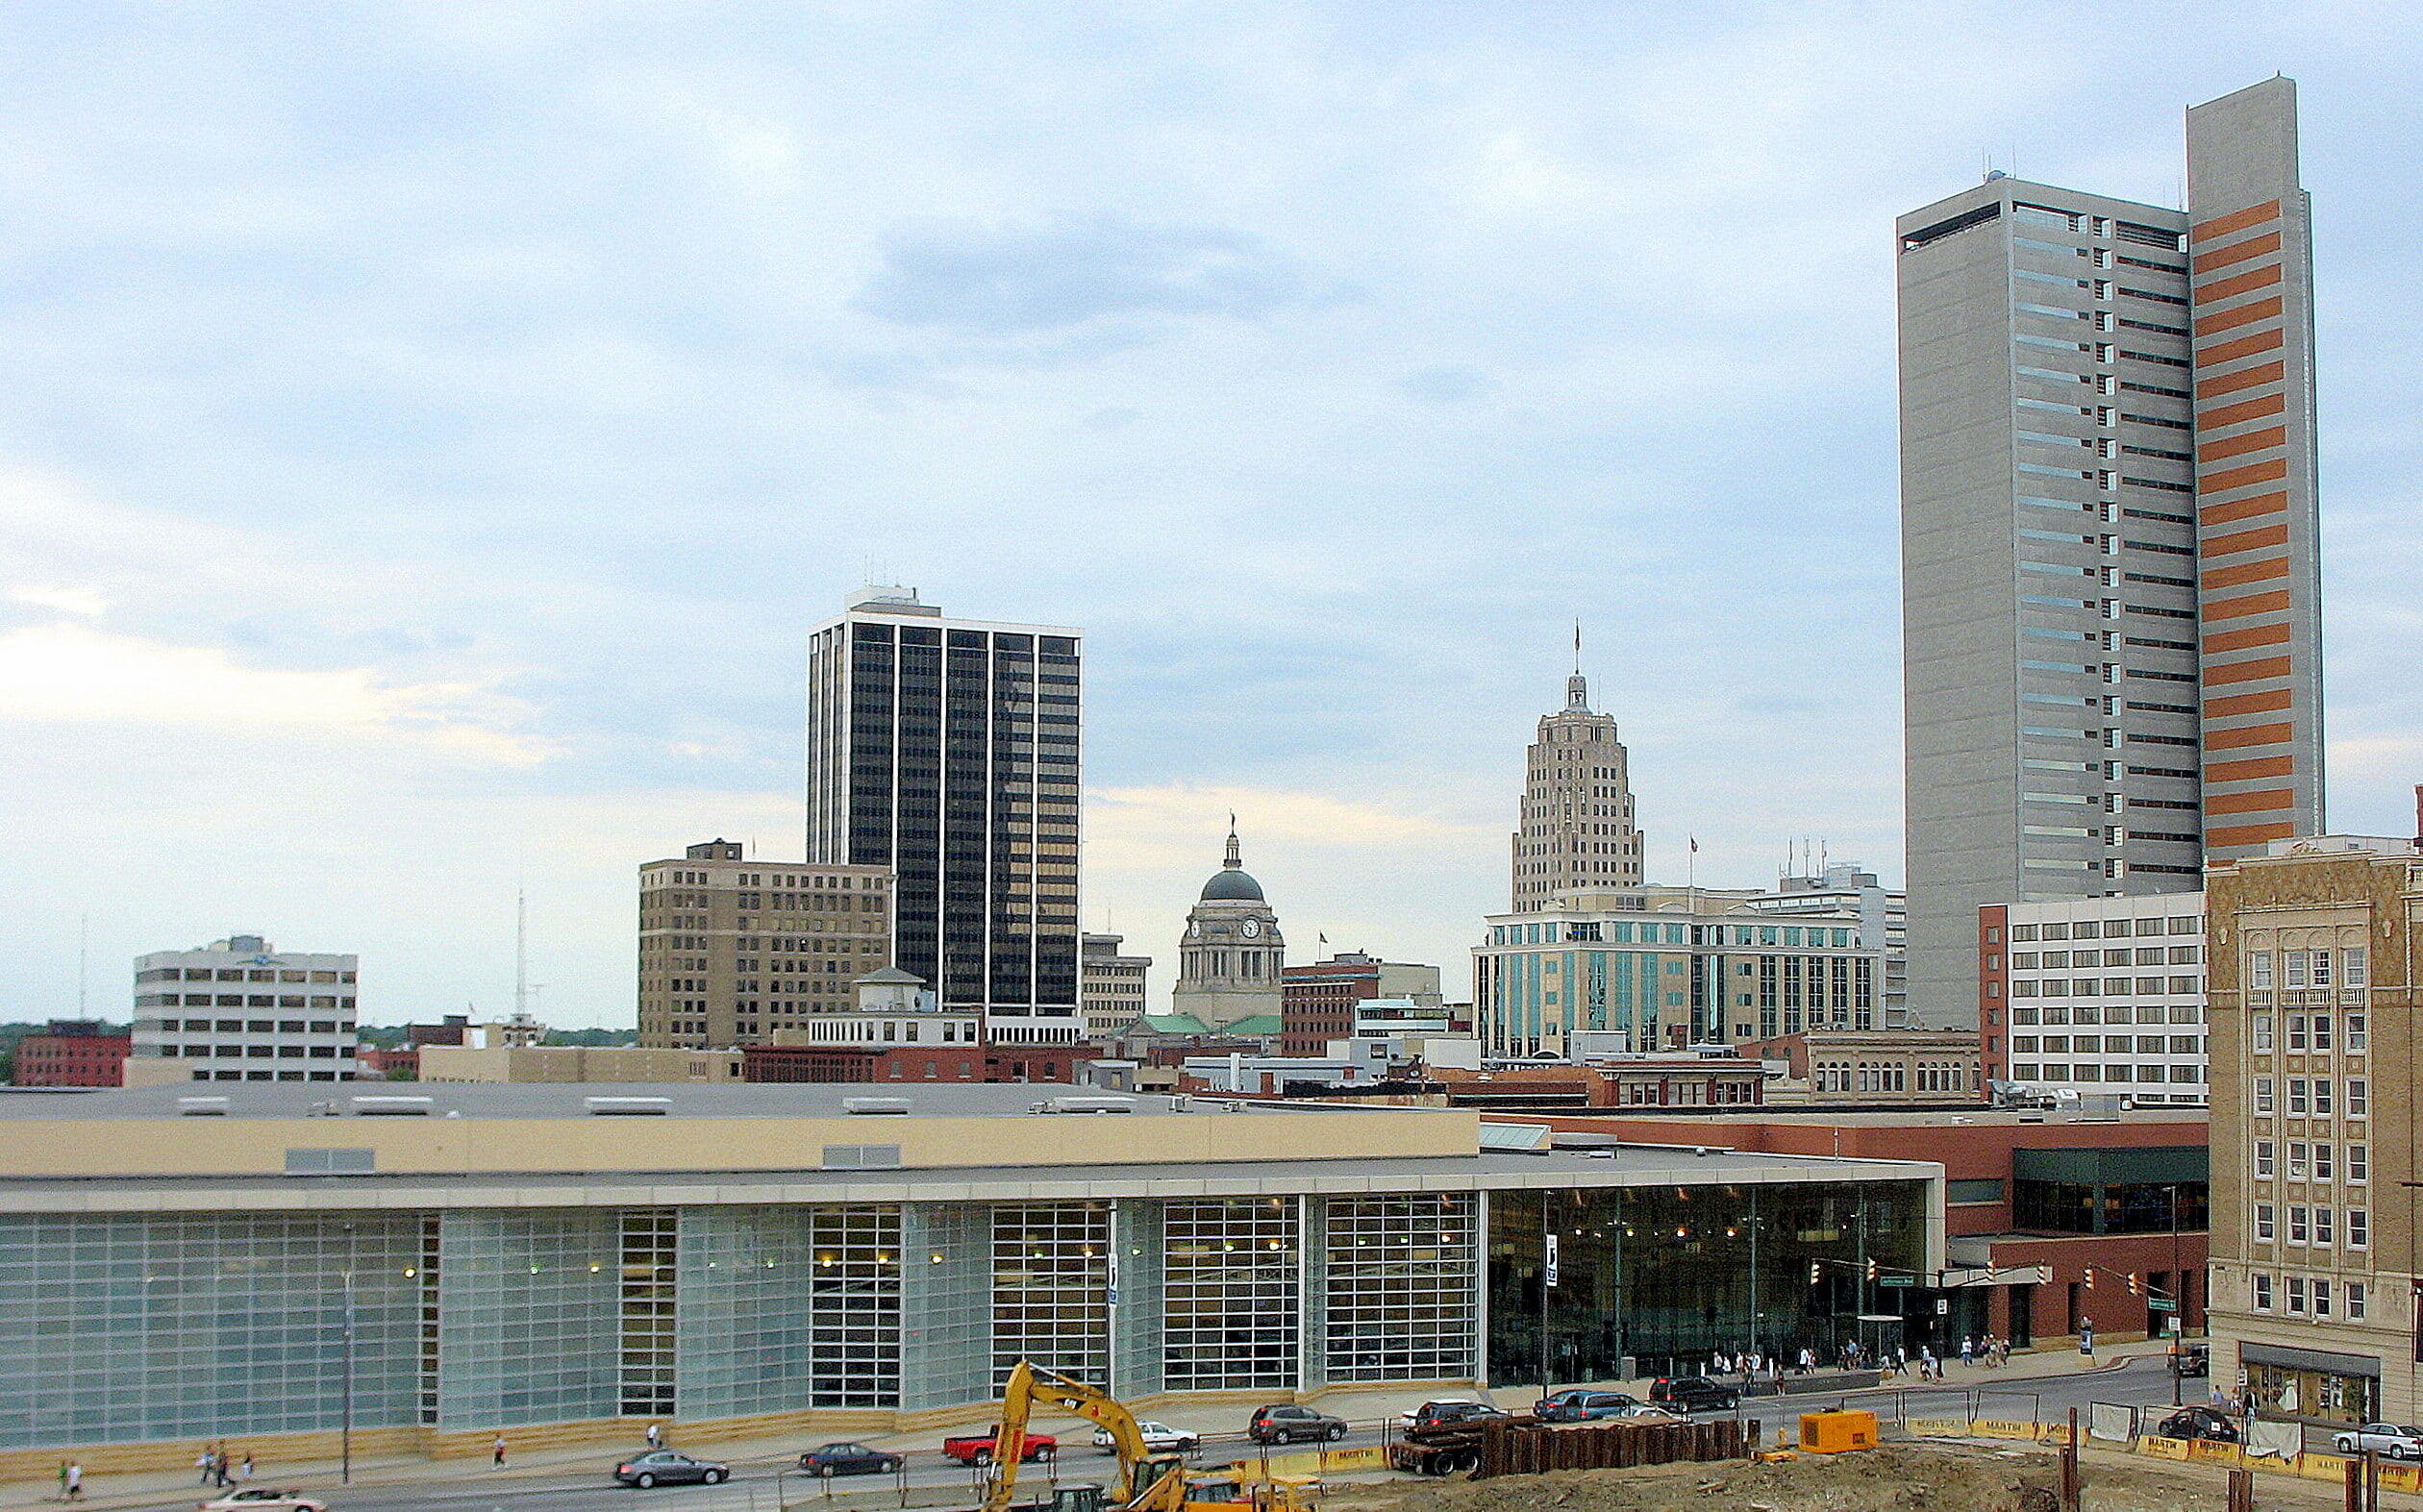 Fort Wayne - Looking to the northeast at the Fort Wayne, Indiana skyline from atop the Harrison Square Parking Deck.